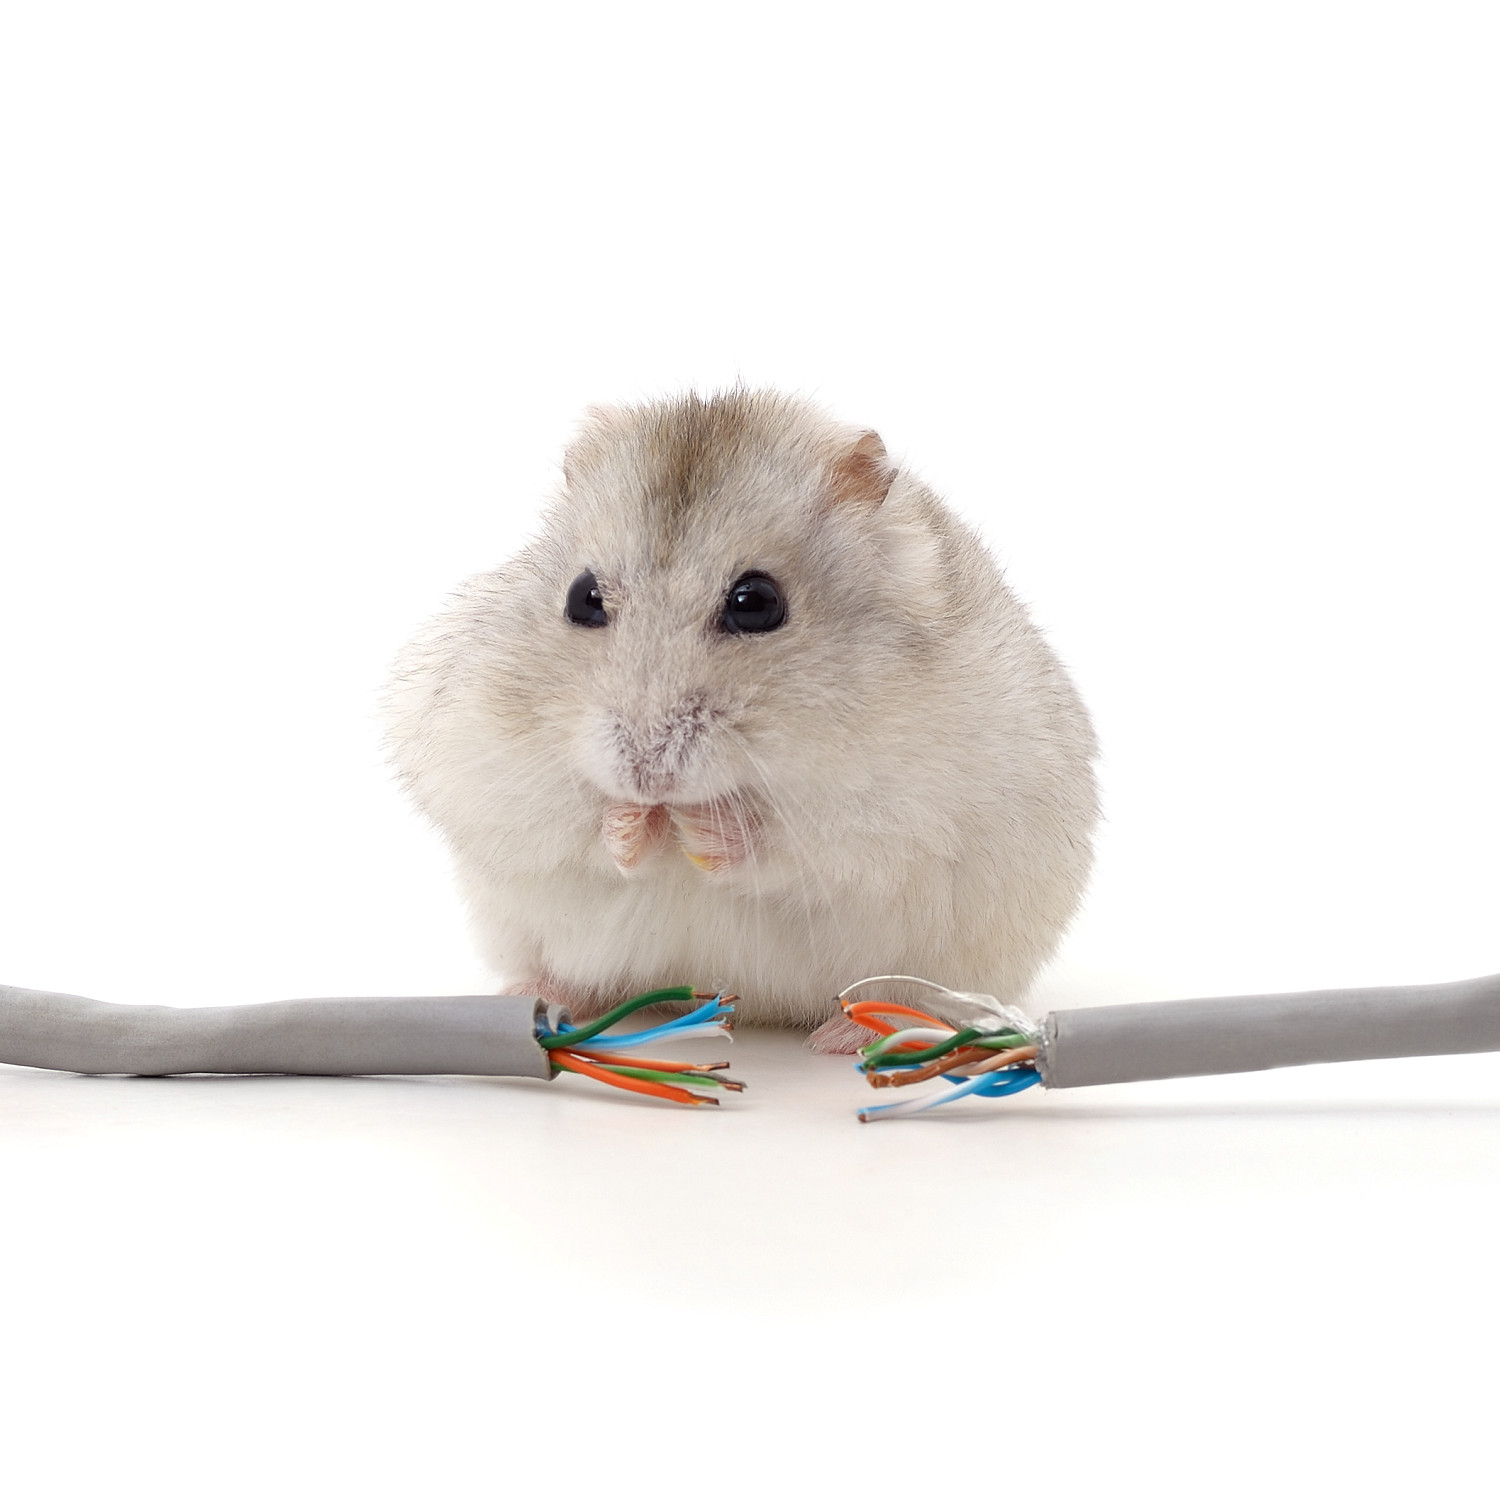 Hamster biting a cable.